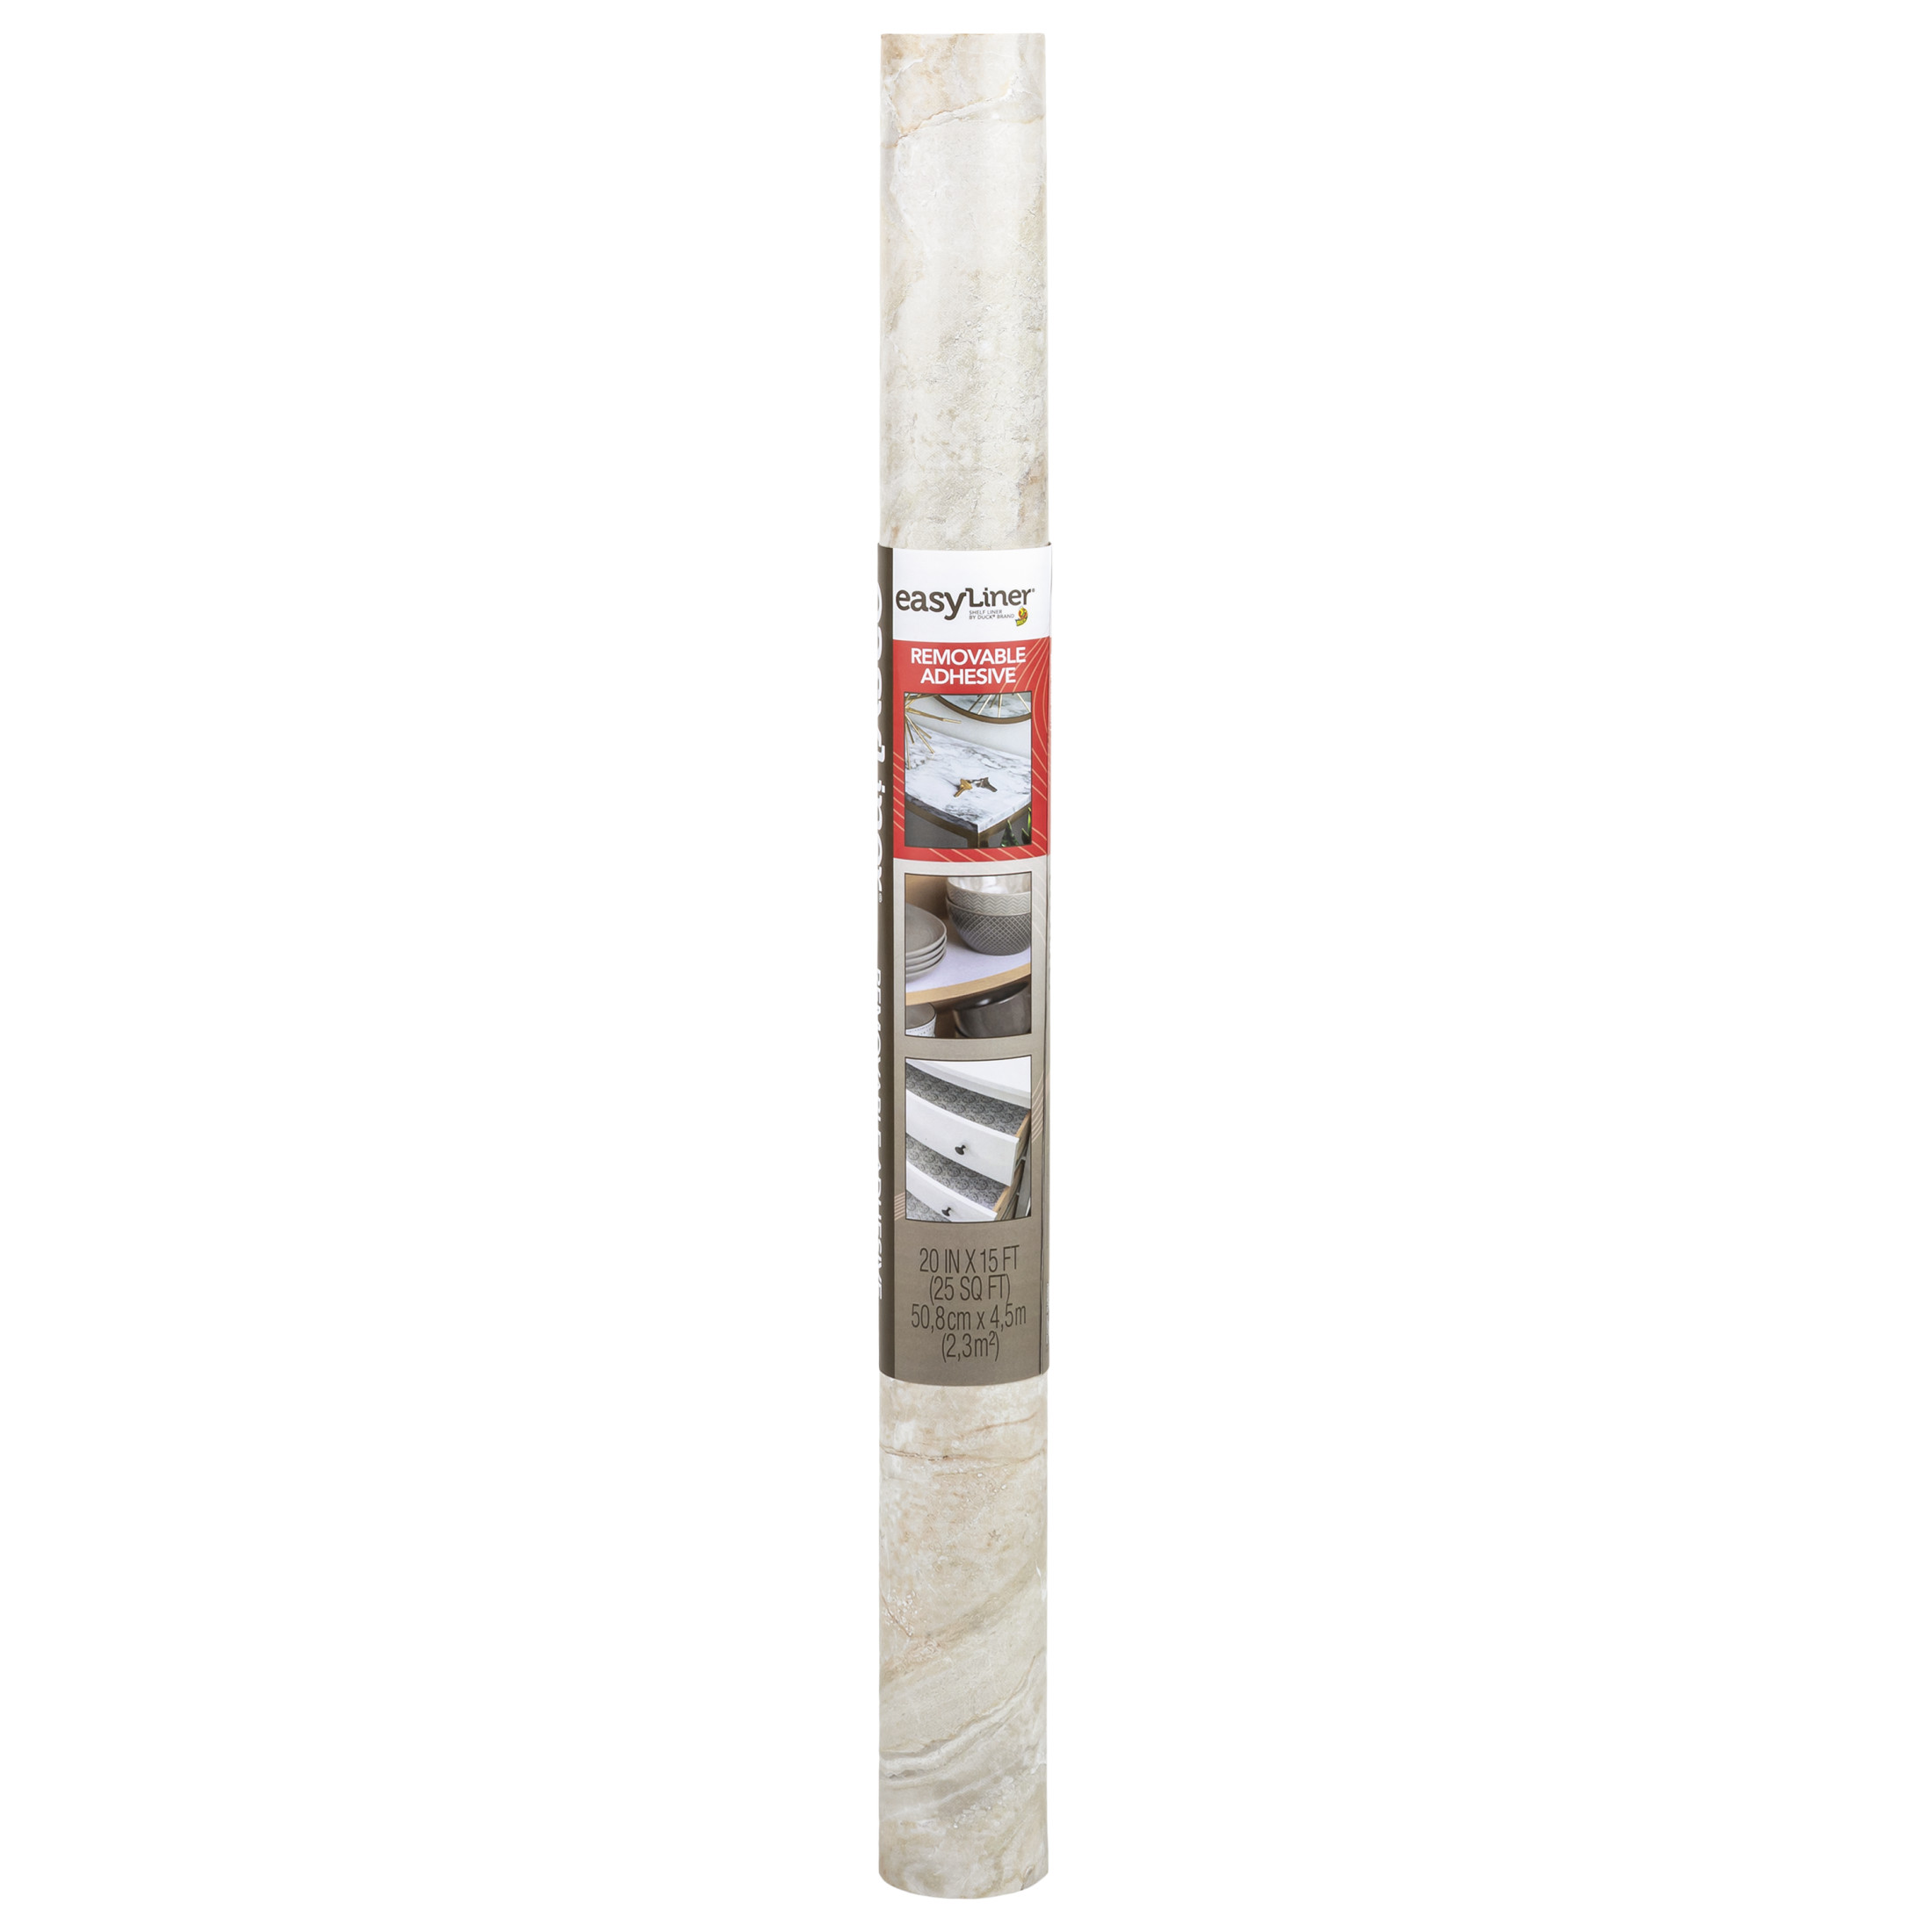 EasyLiner Brand Contact Paper Adhesive Shelf Liner, Beige Marble, 20 in. x 15 ft. Roll - image 4 of 11